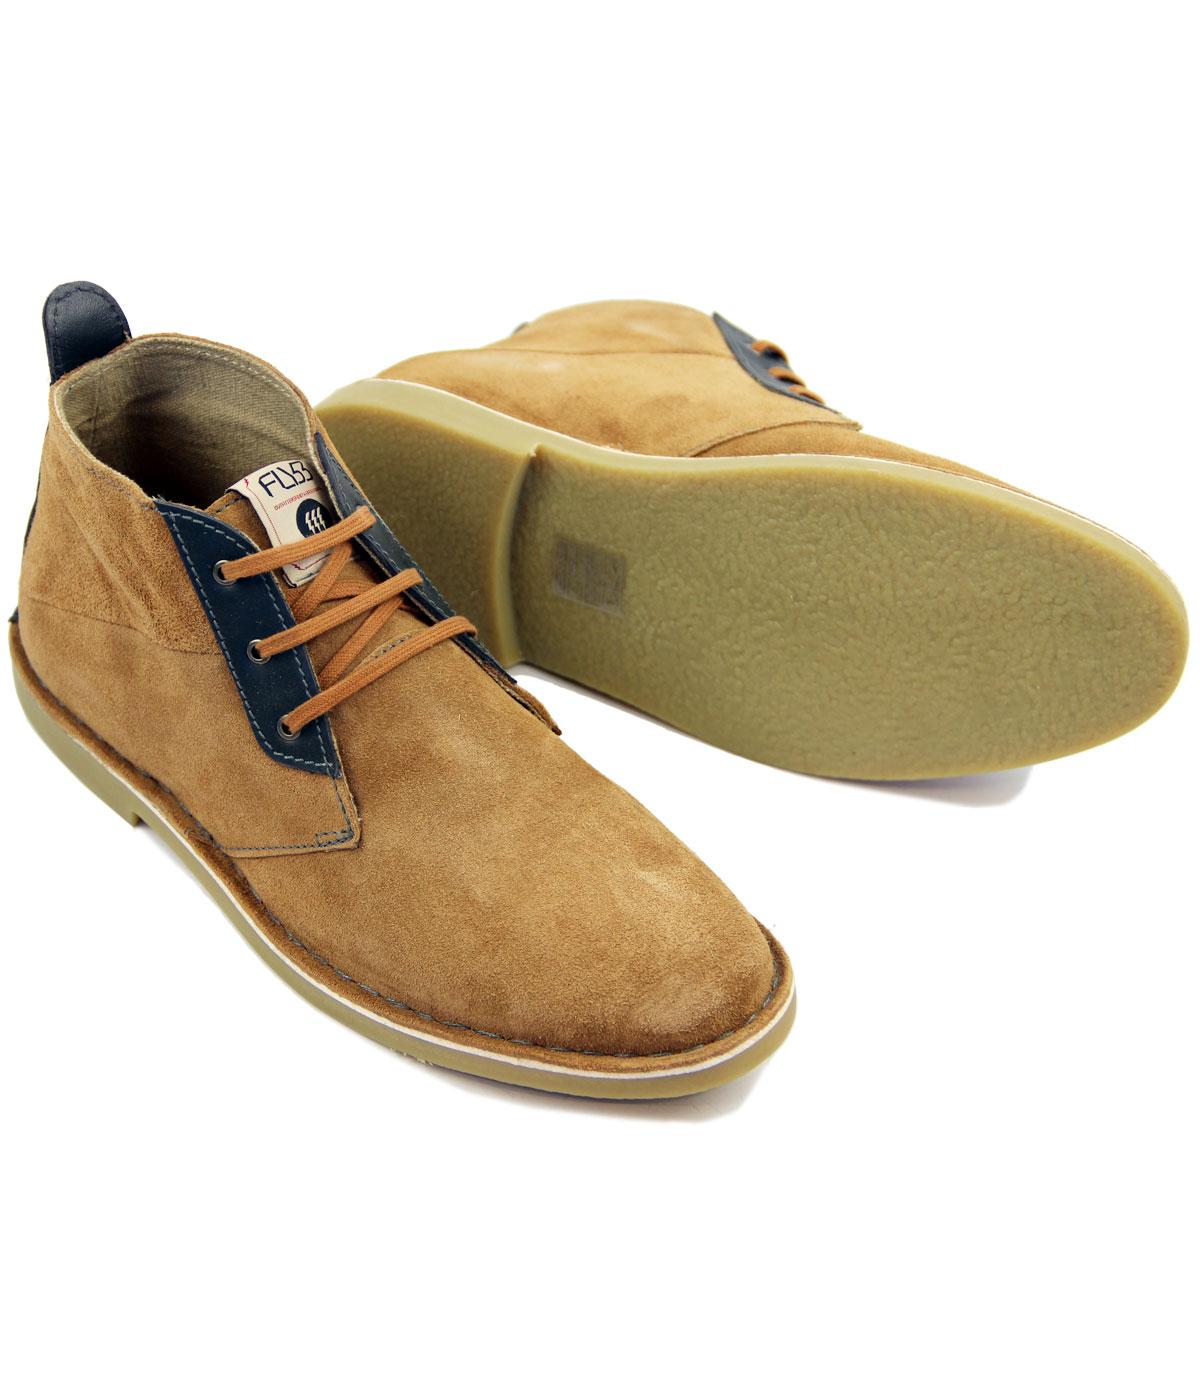 FLY53 Montana Retro Mod Suede & Leather Desert Boots in Coffee